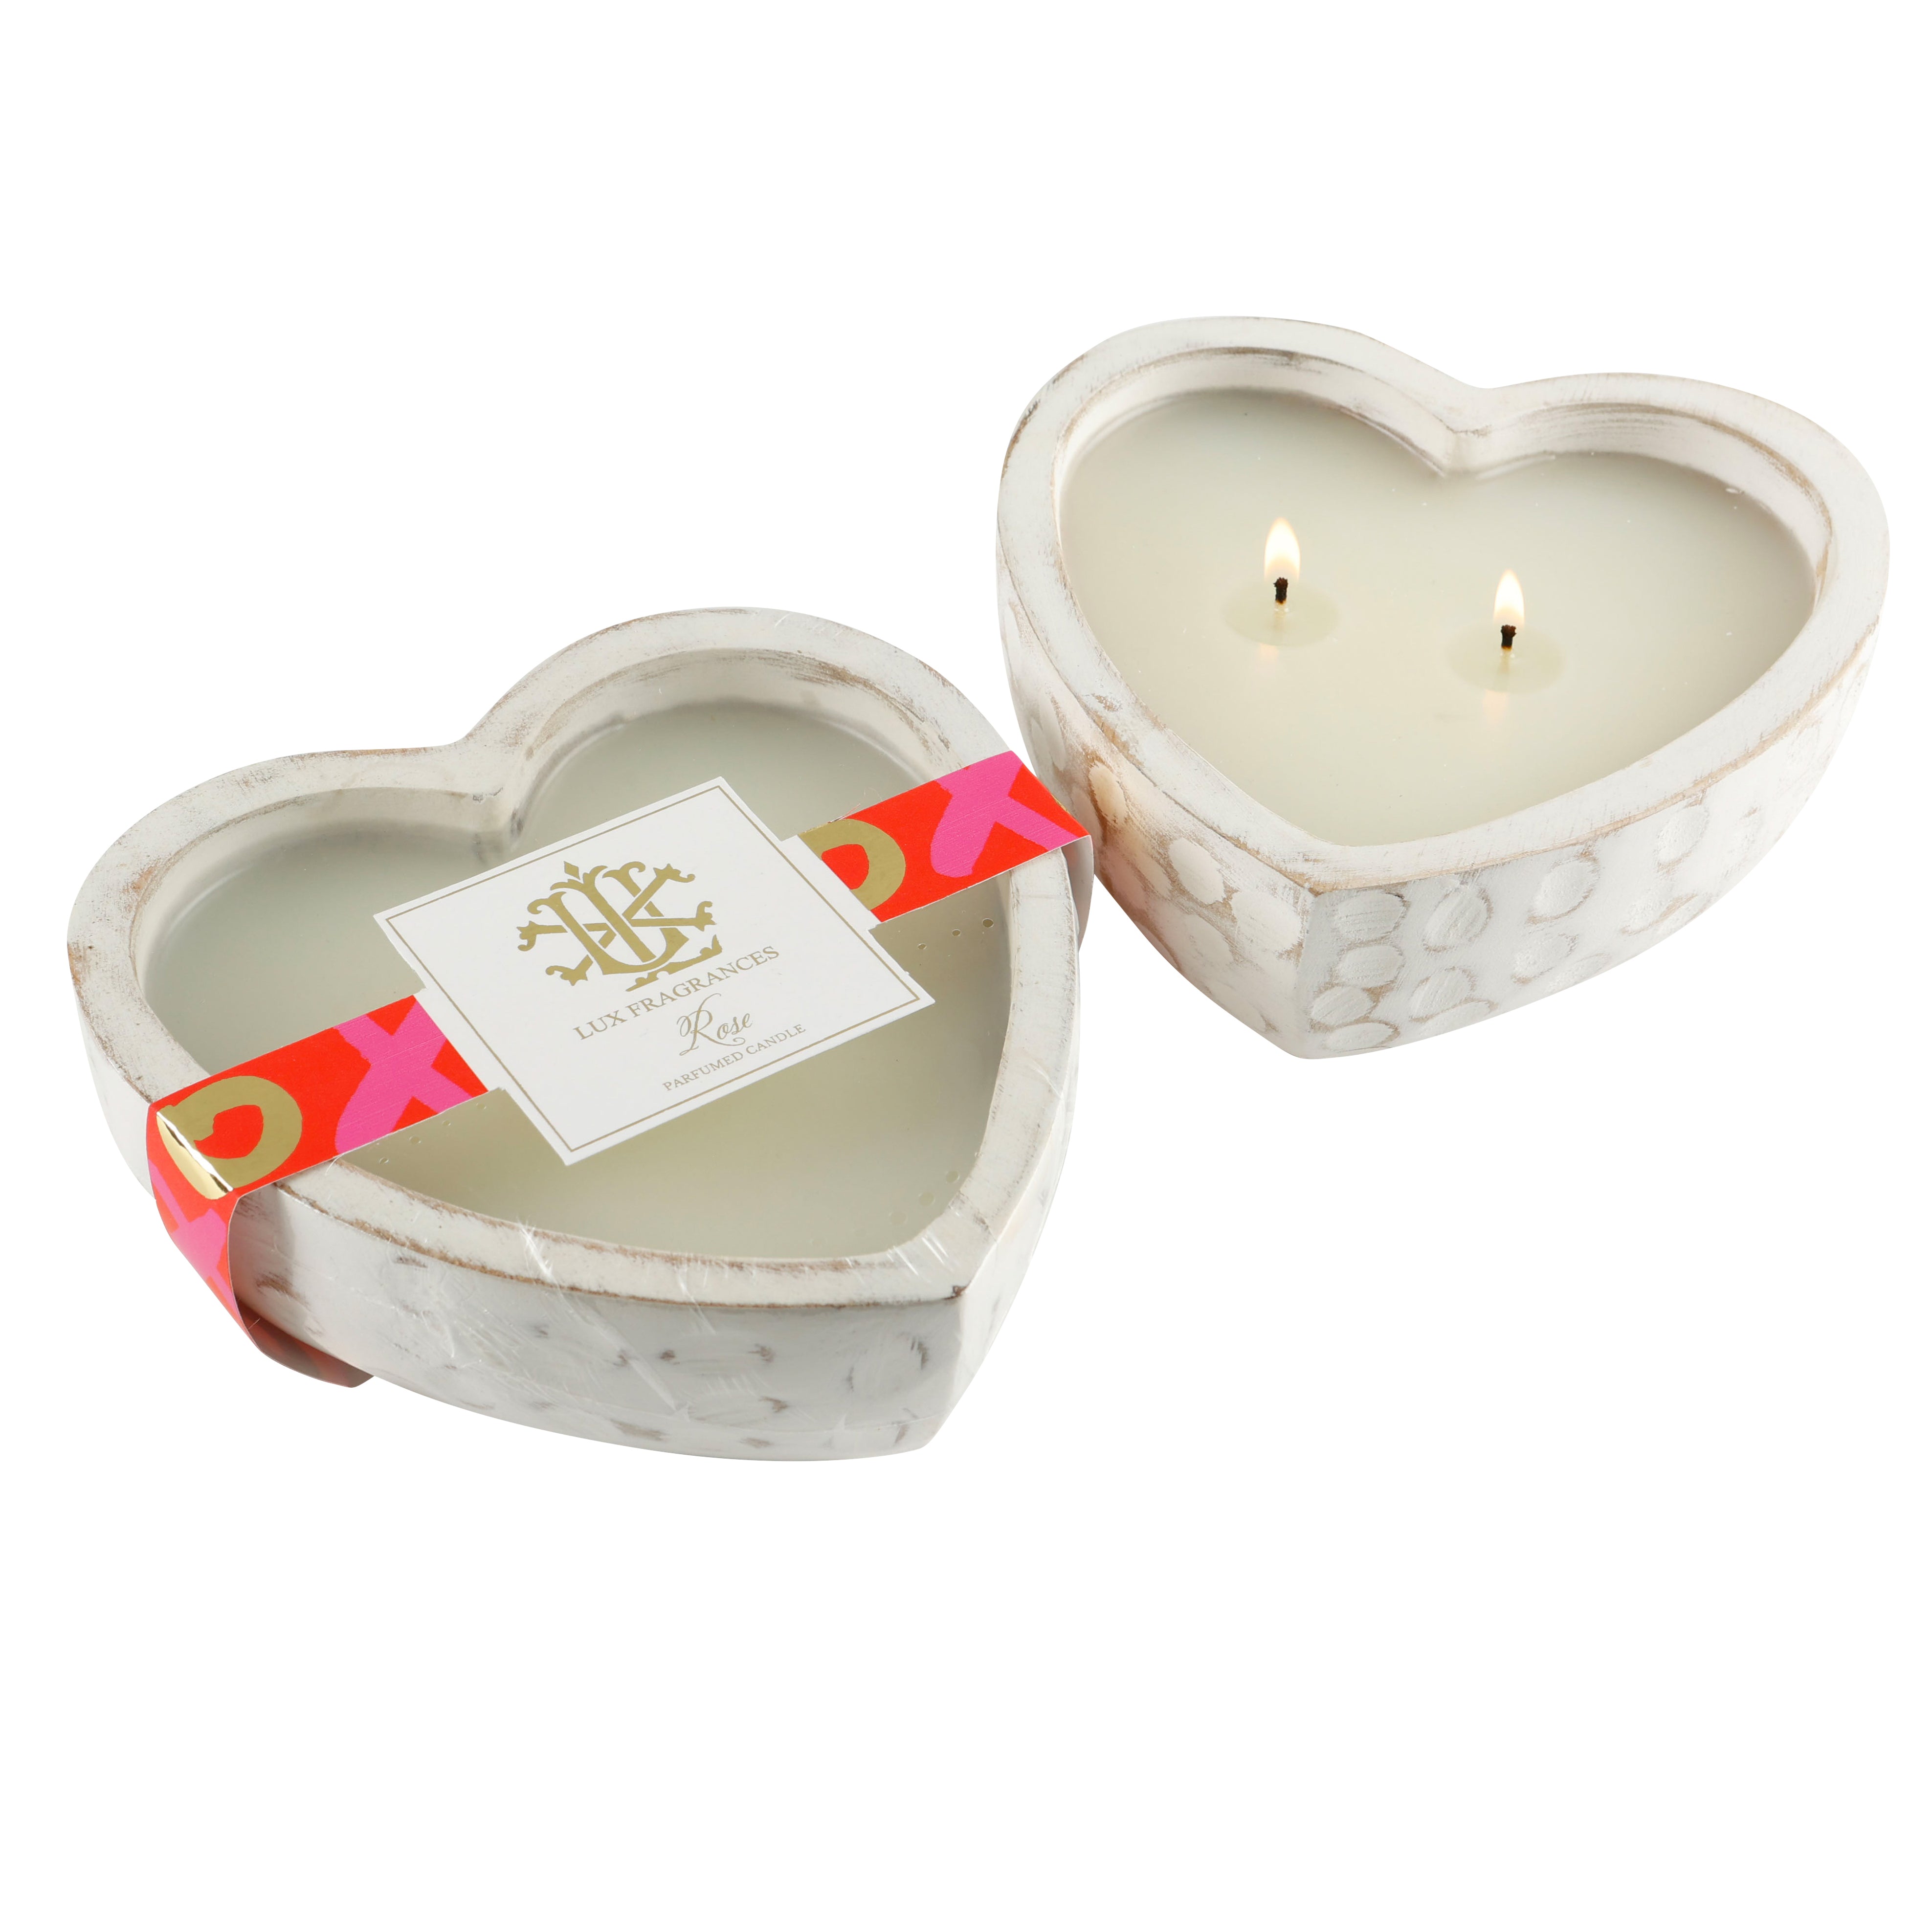 Heart Shaped Paraffin Wax Heart Shaped Candles For Home Decor